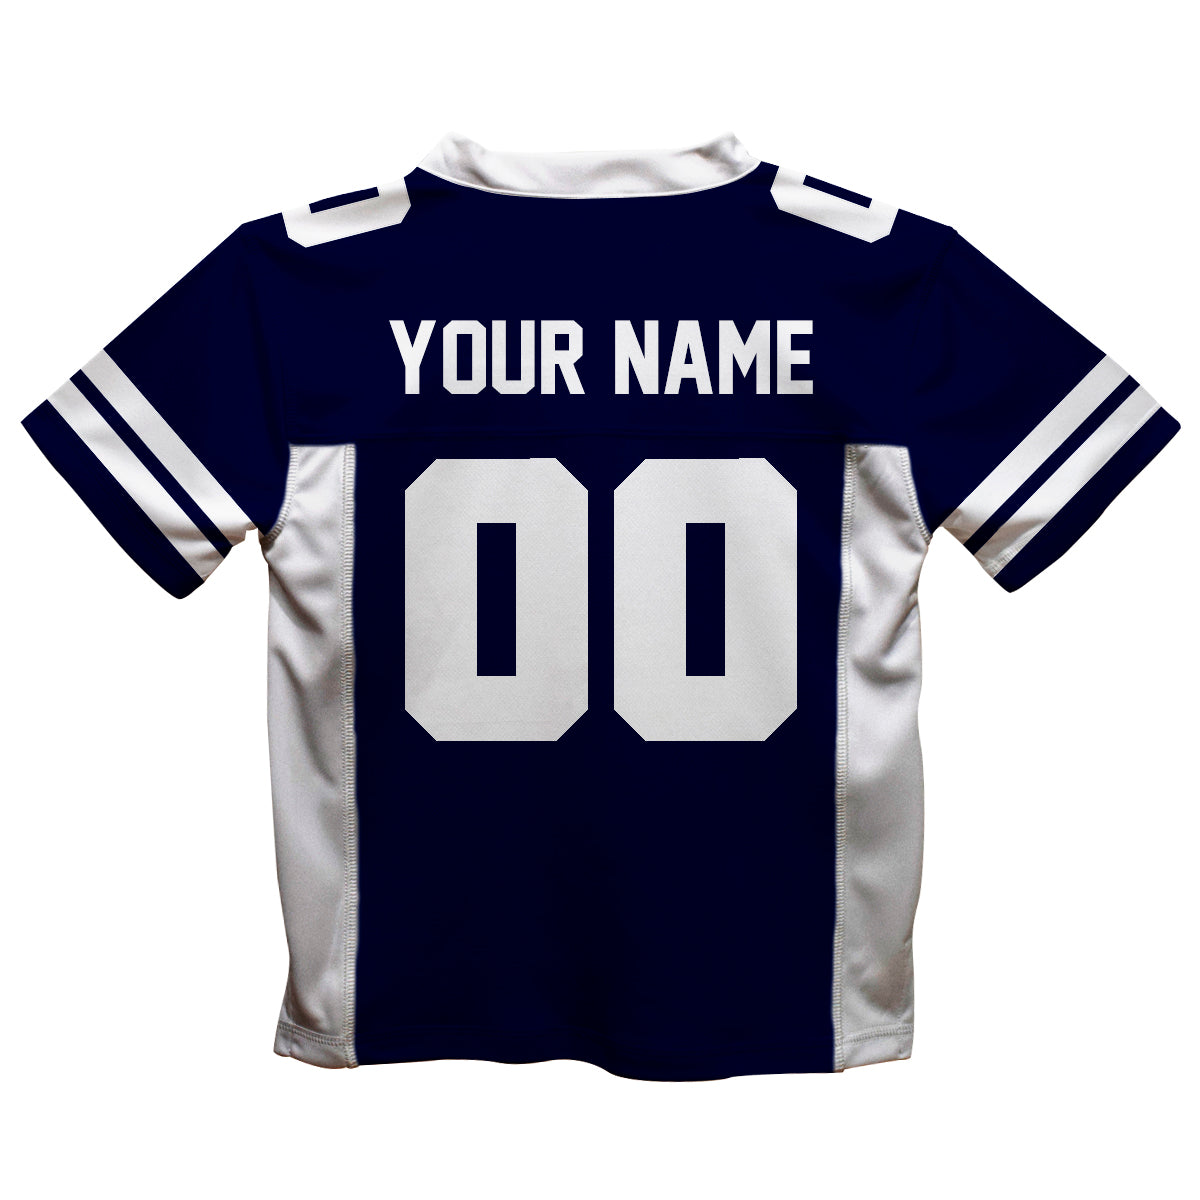 Personalized Name and Number Red and White Fashion Football T-Shirt - Wimziy&Co.